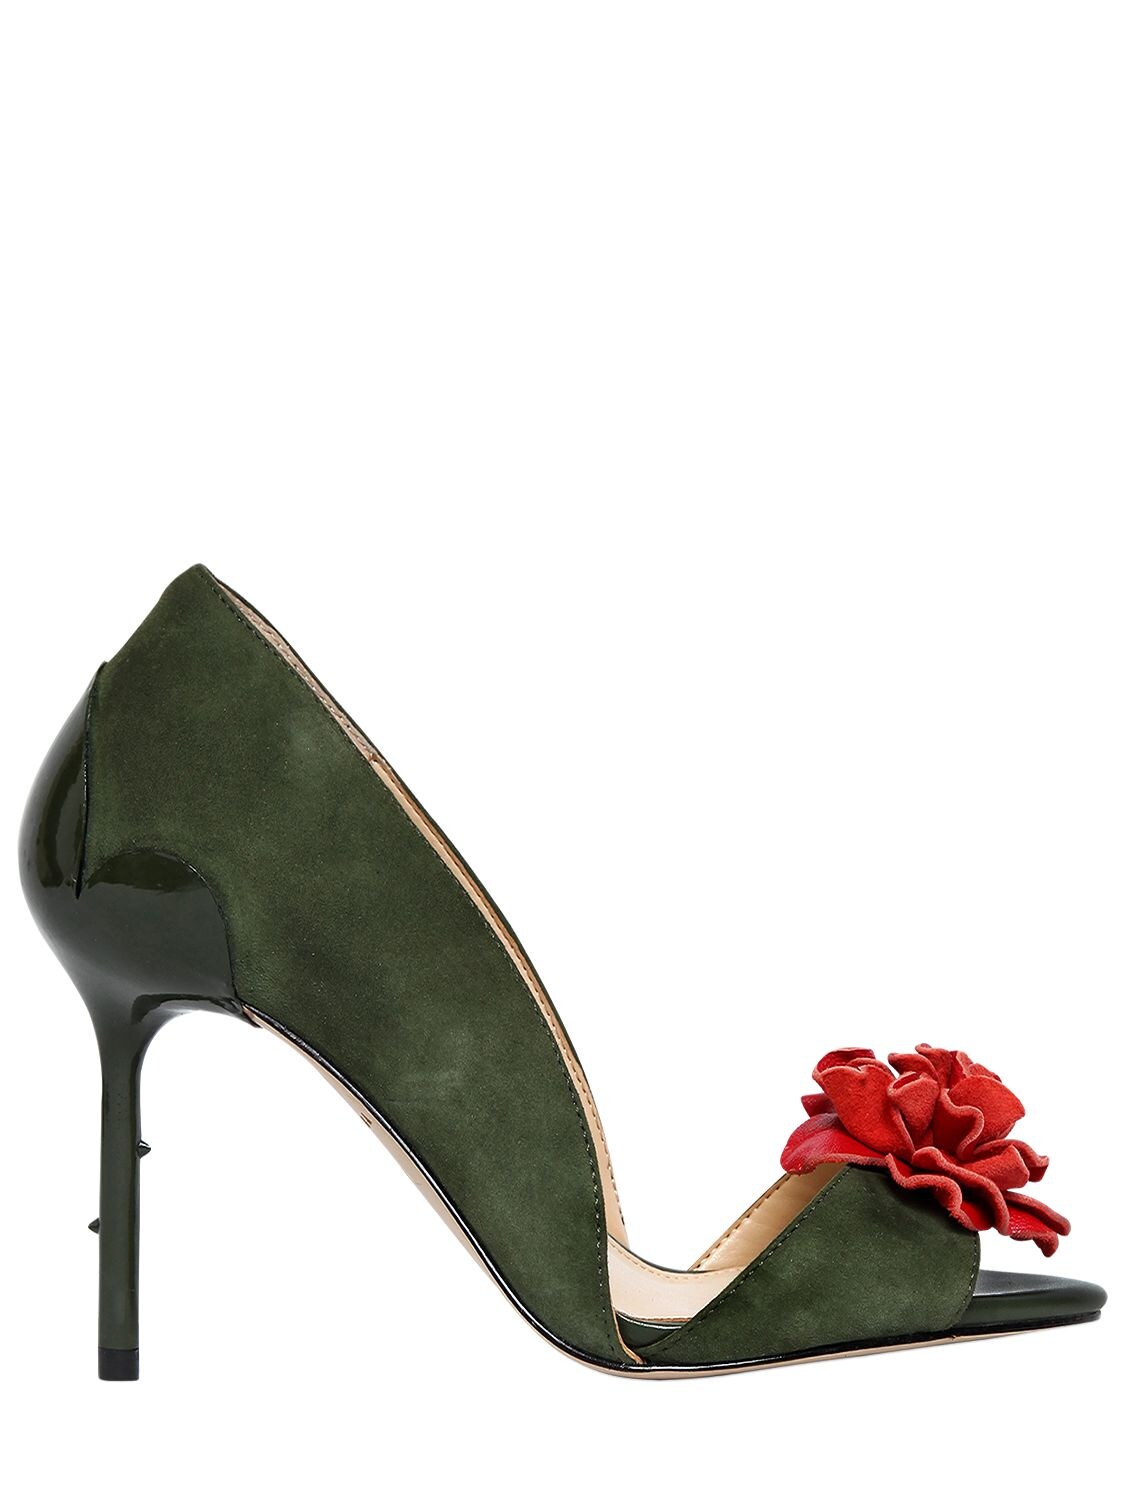 Katy Perry 90mm Faye Flower Suede Pumps In Forest Green